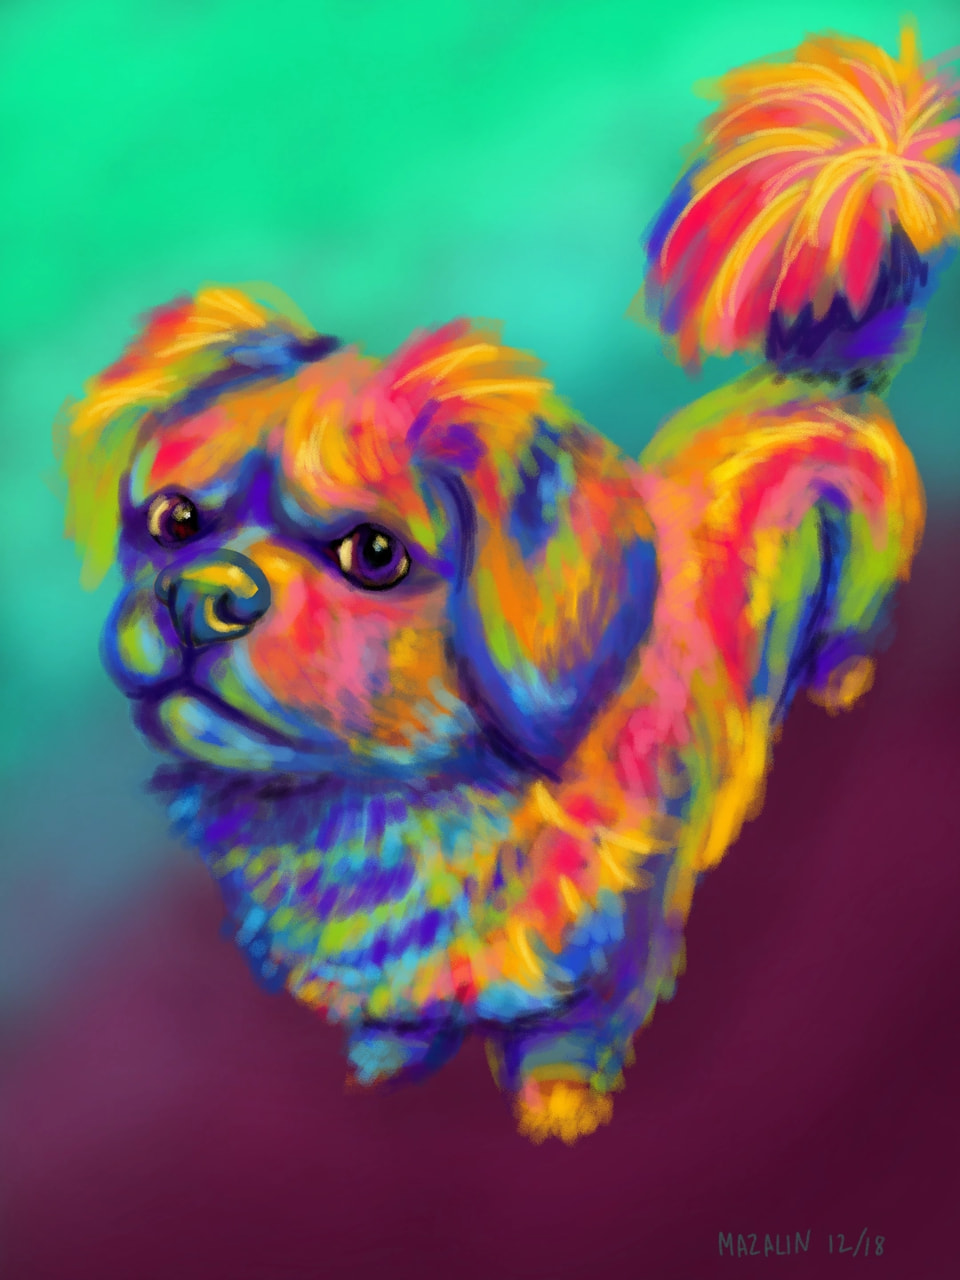 Another one for #manycolors challenge! #dog #fridayswithsketch